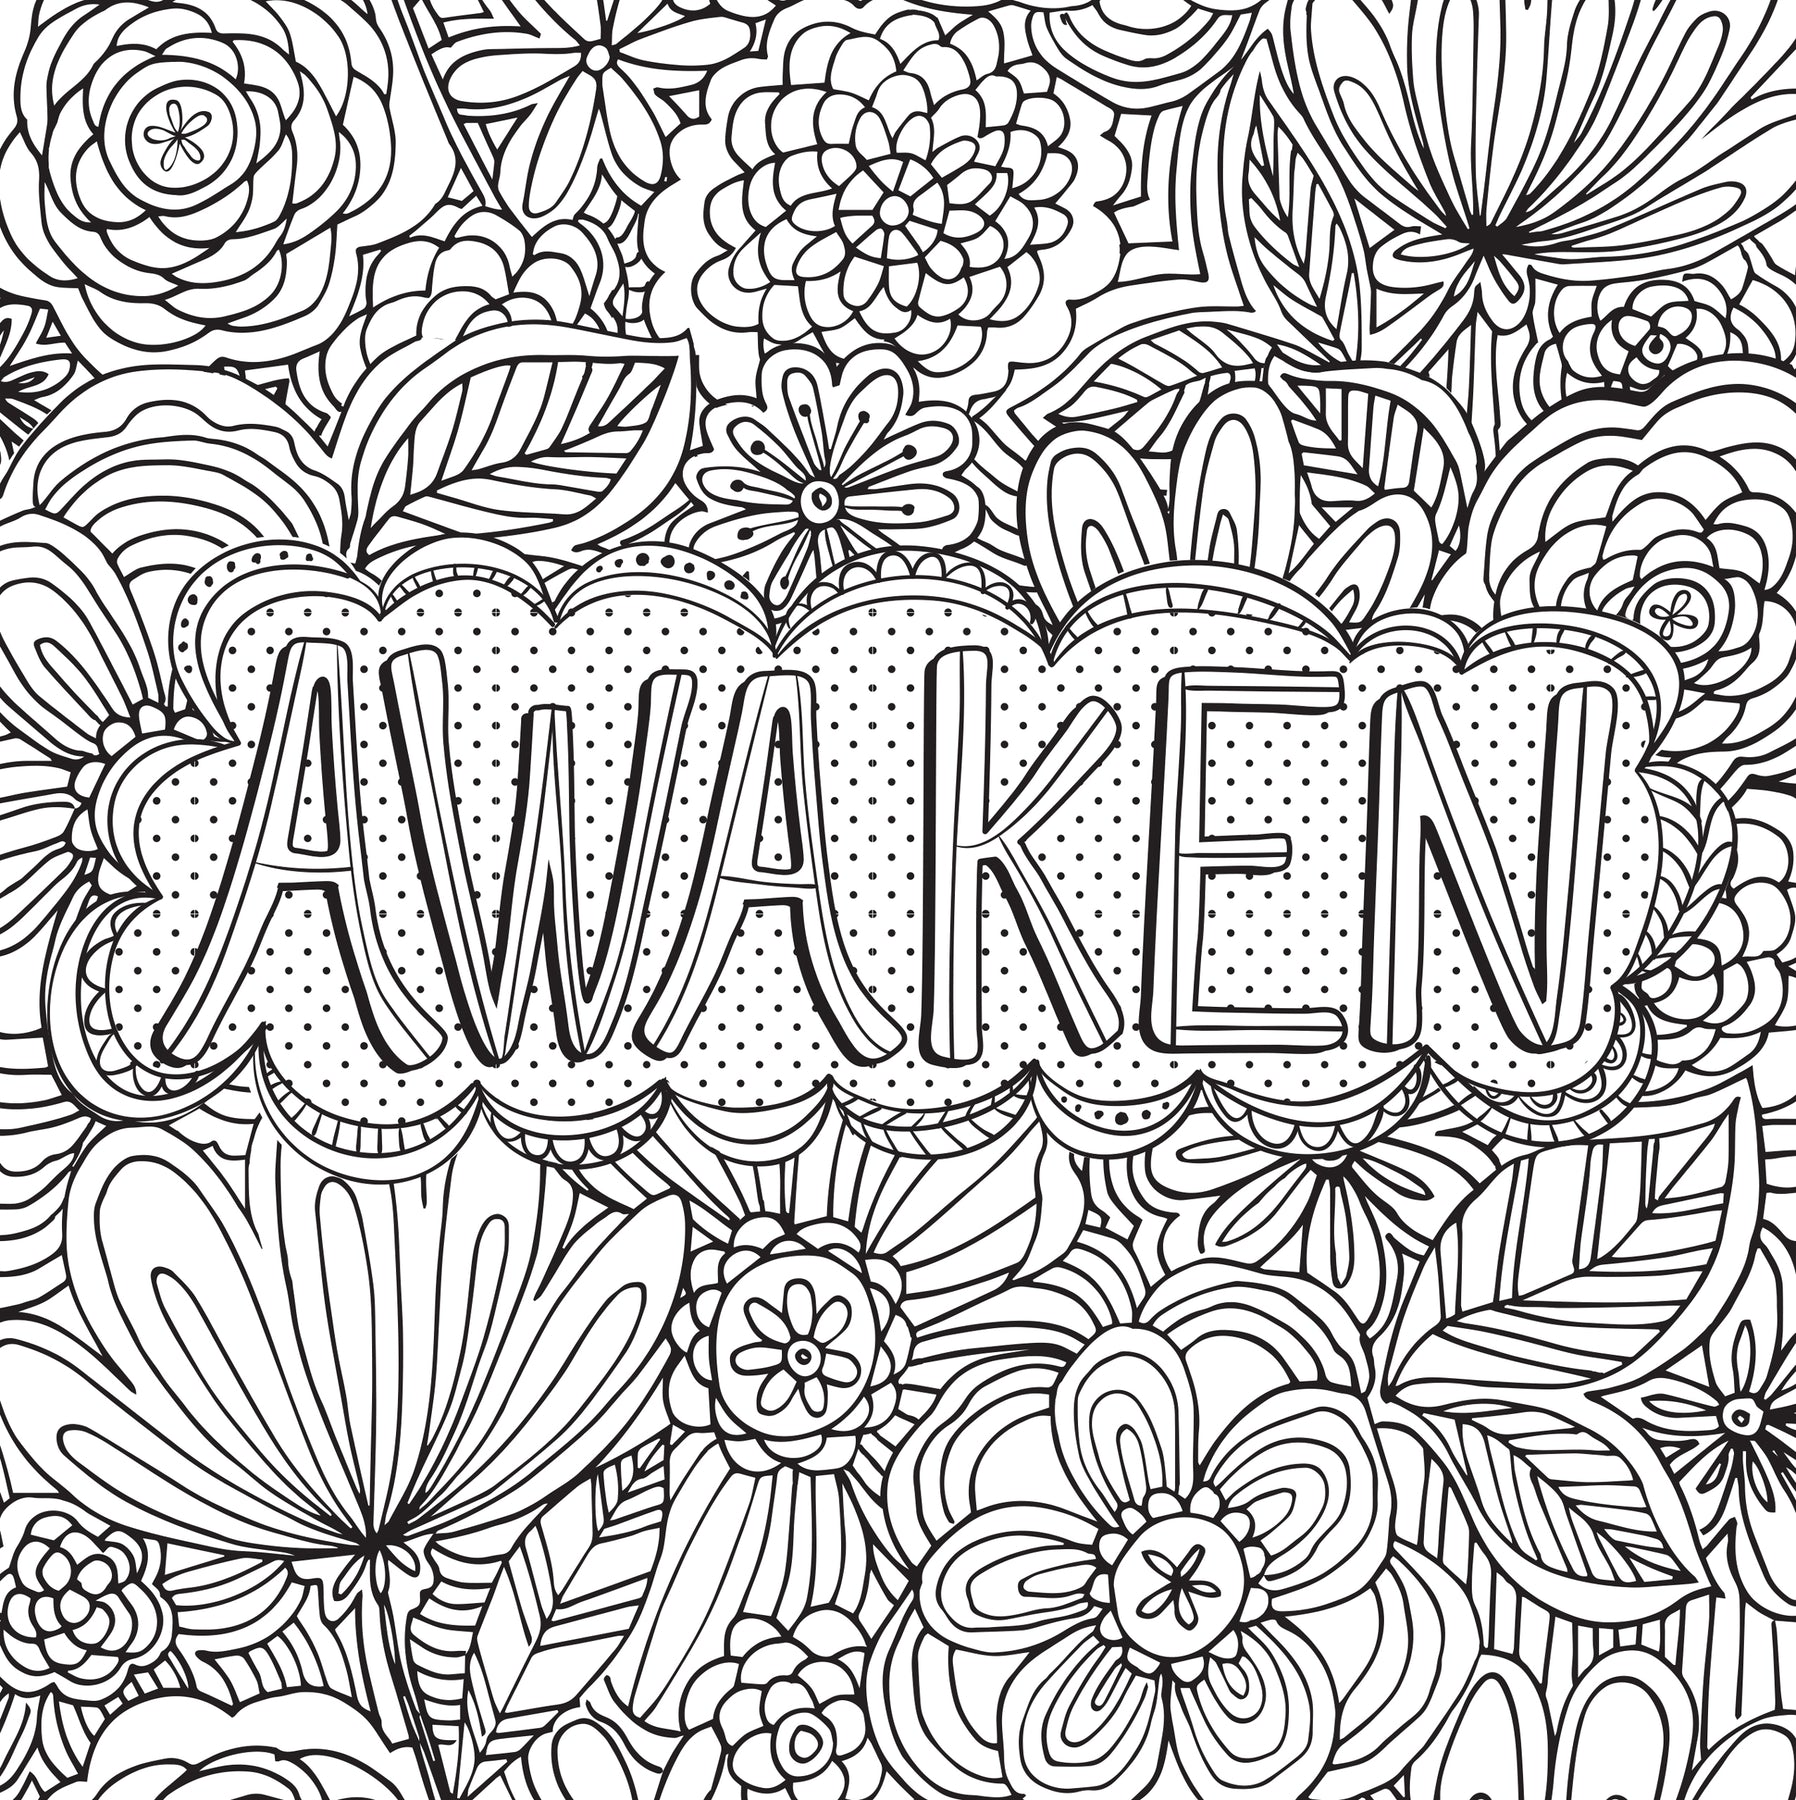 Adult Advanced Coloring Book Inspiration & Hope w/ New 6pk Pastel Markers